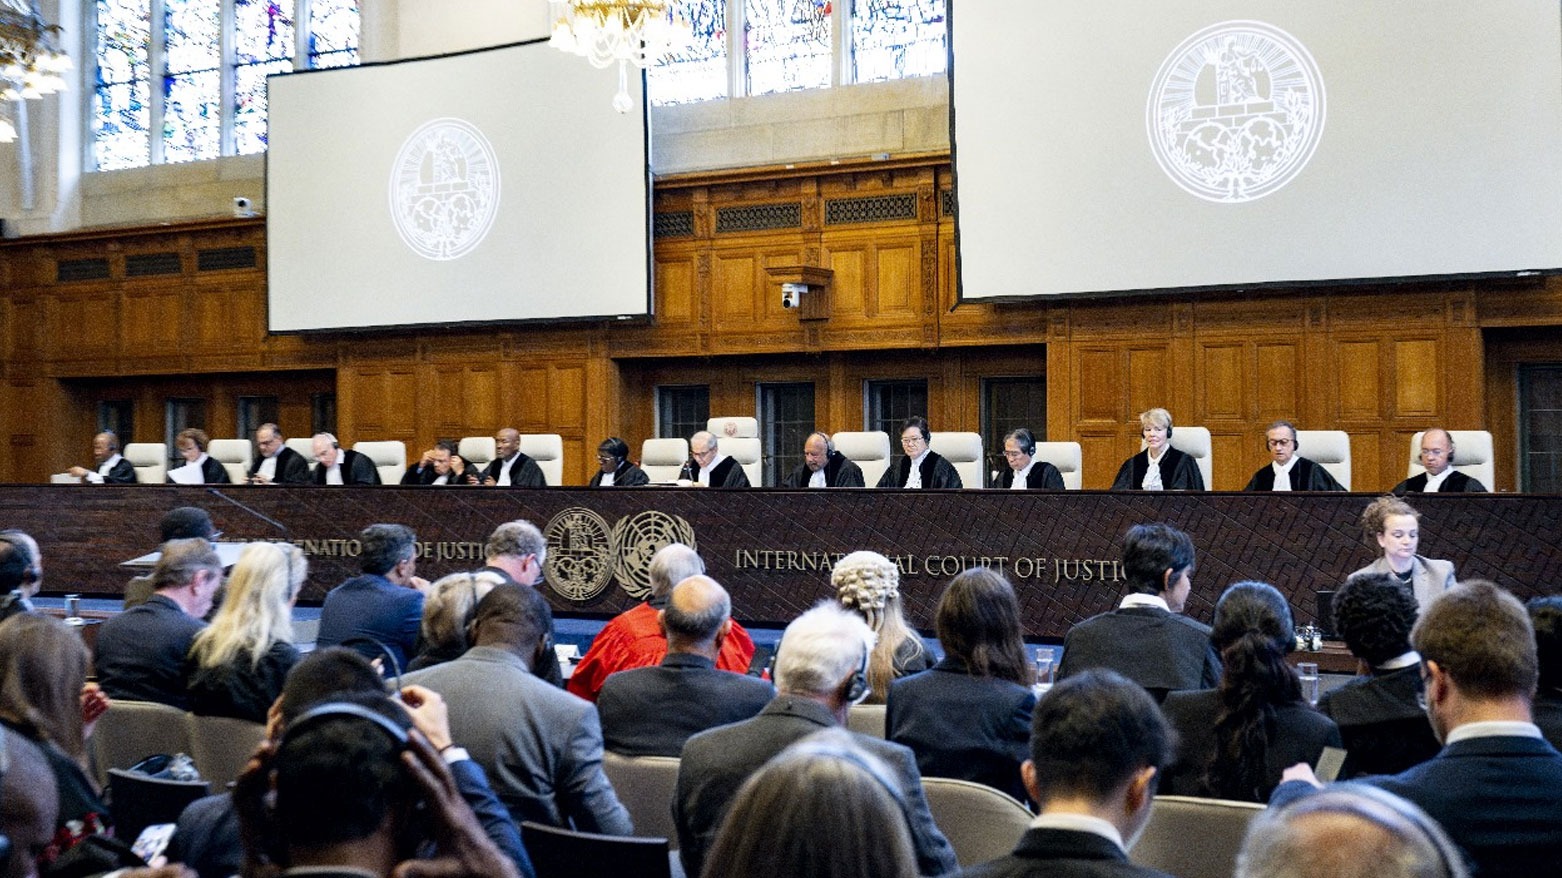 ICJ judges (top) attend a hearing of the International Court of Justice (ICJ). (Photo: AFP)